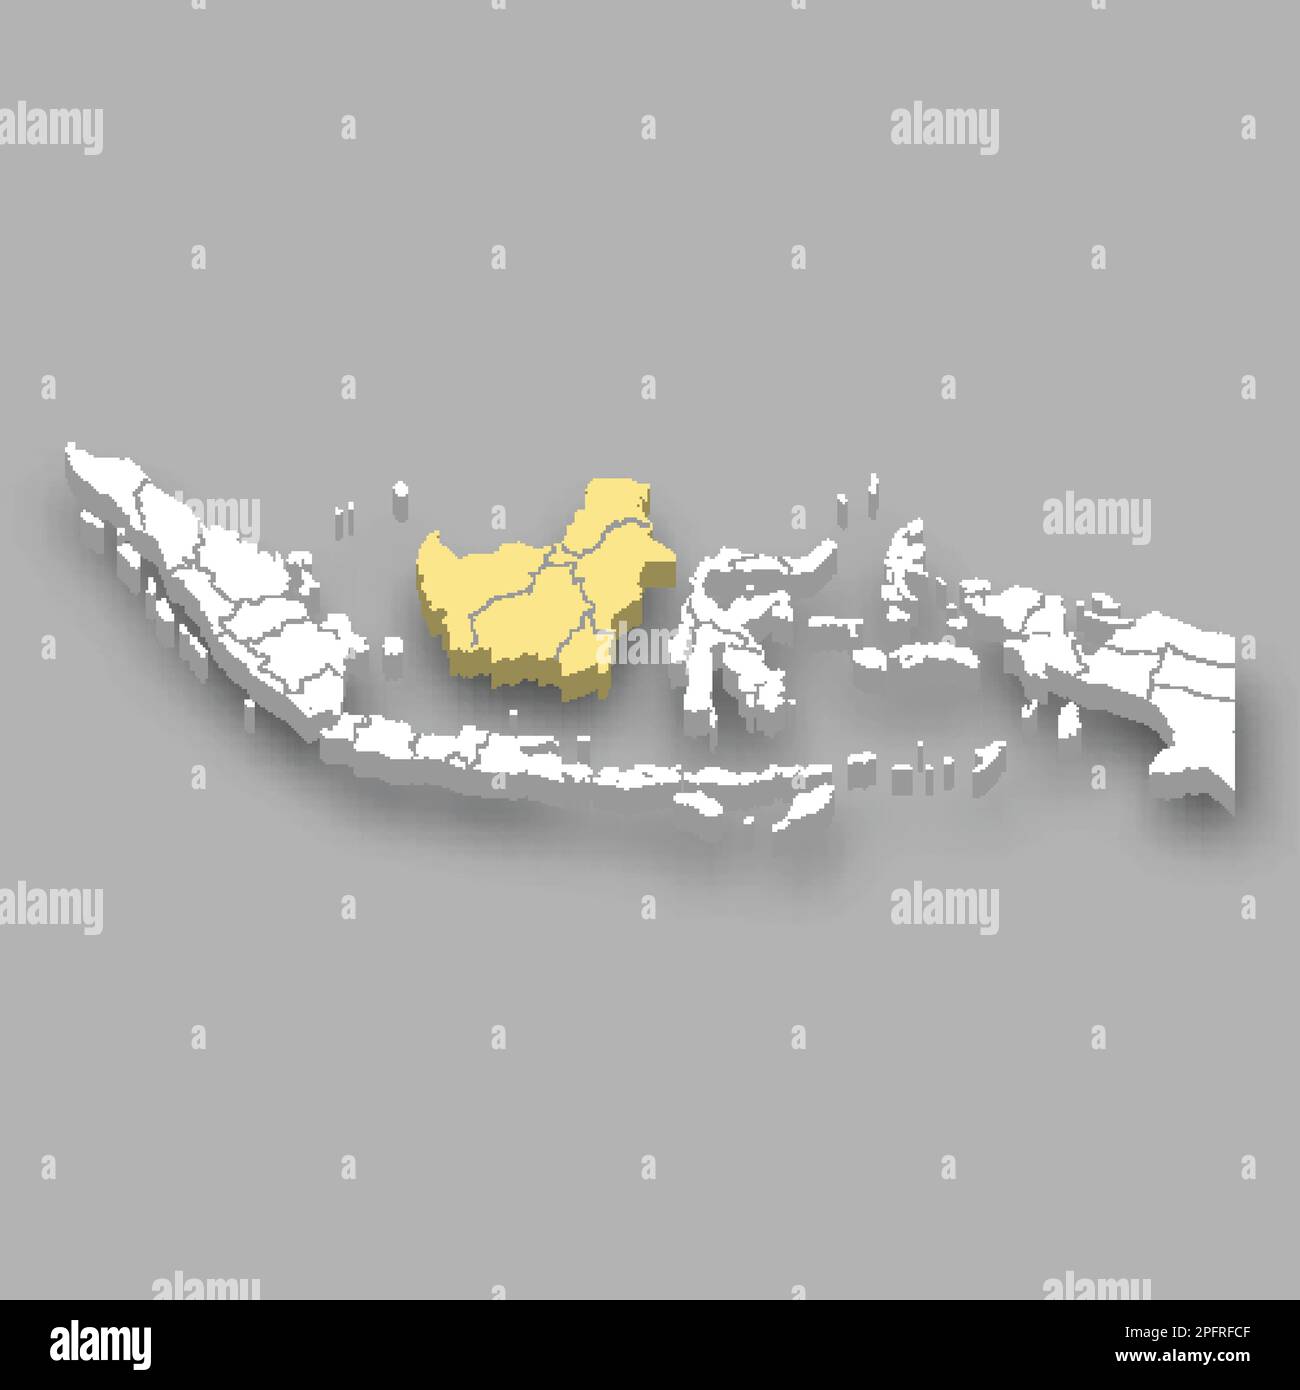 Kalimantan region location within Indonesia 3d isometric map Stock Vector